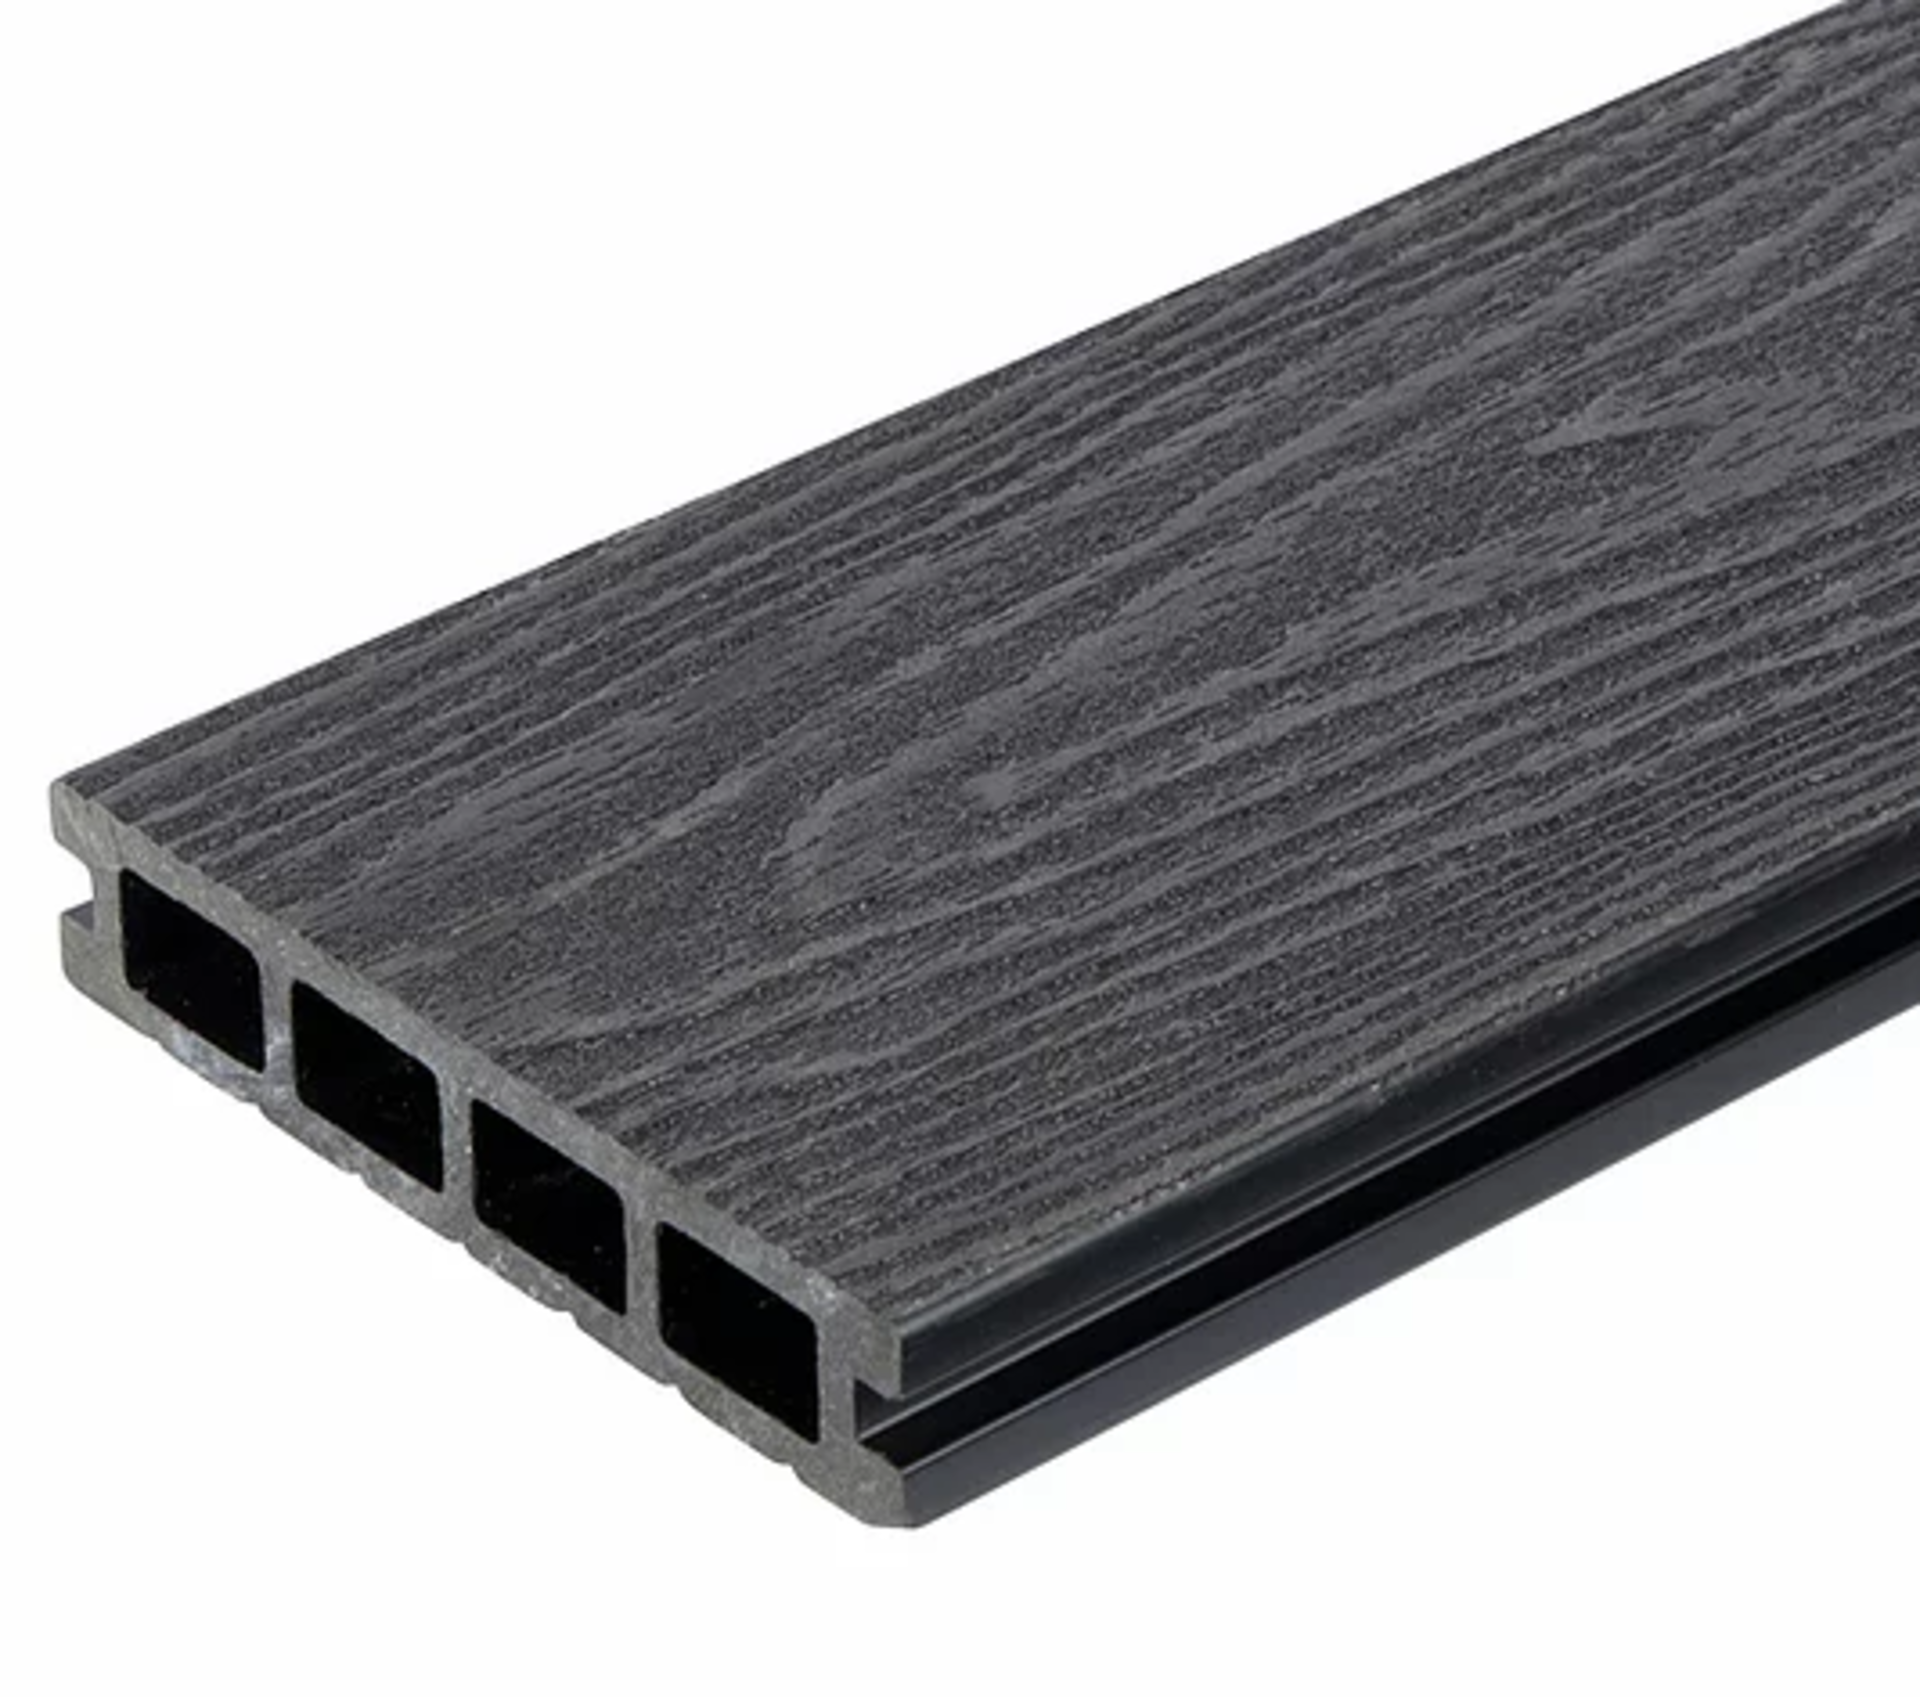 * 20 WPC Composite Dark Grey Double sided Embossed Woodgrain Decking Boards 2900mm x 146mm x 25mm - Image 2 of 5